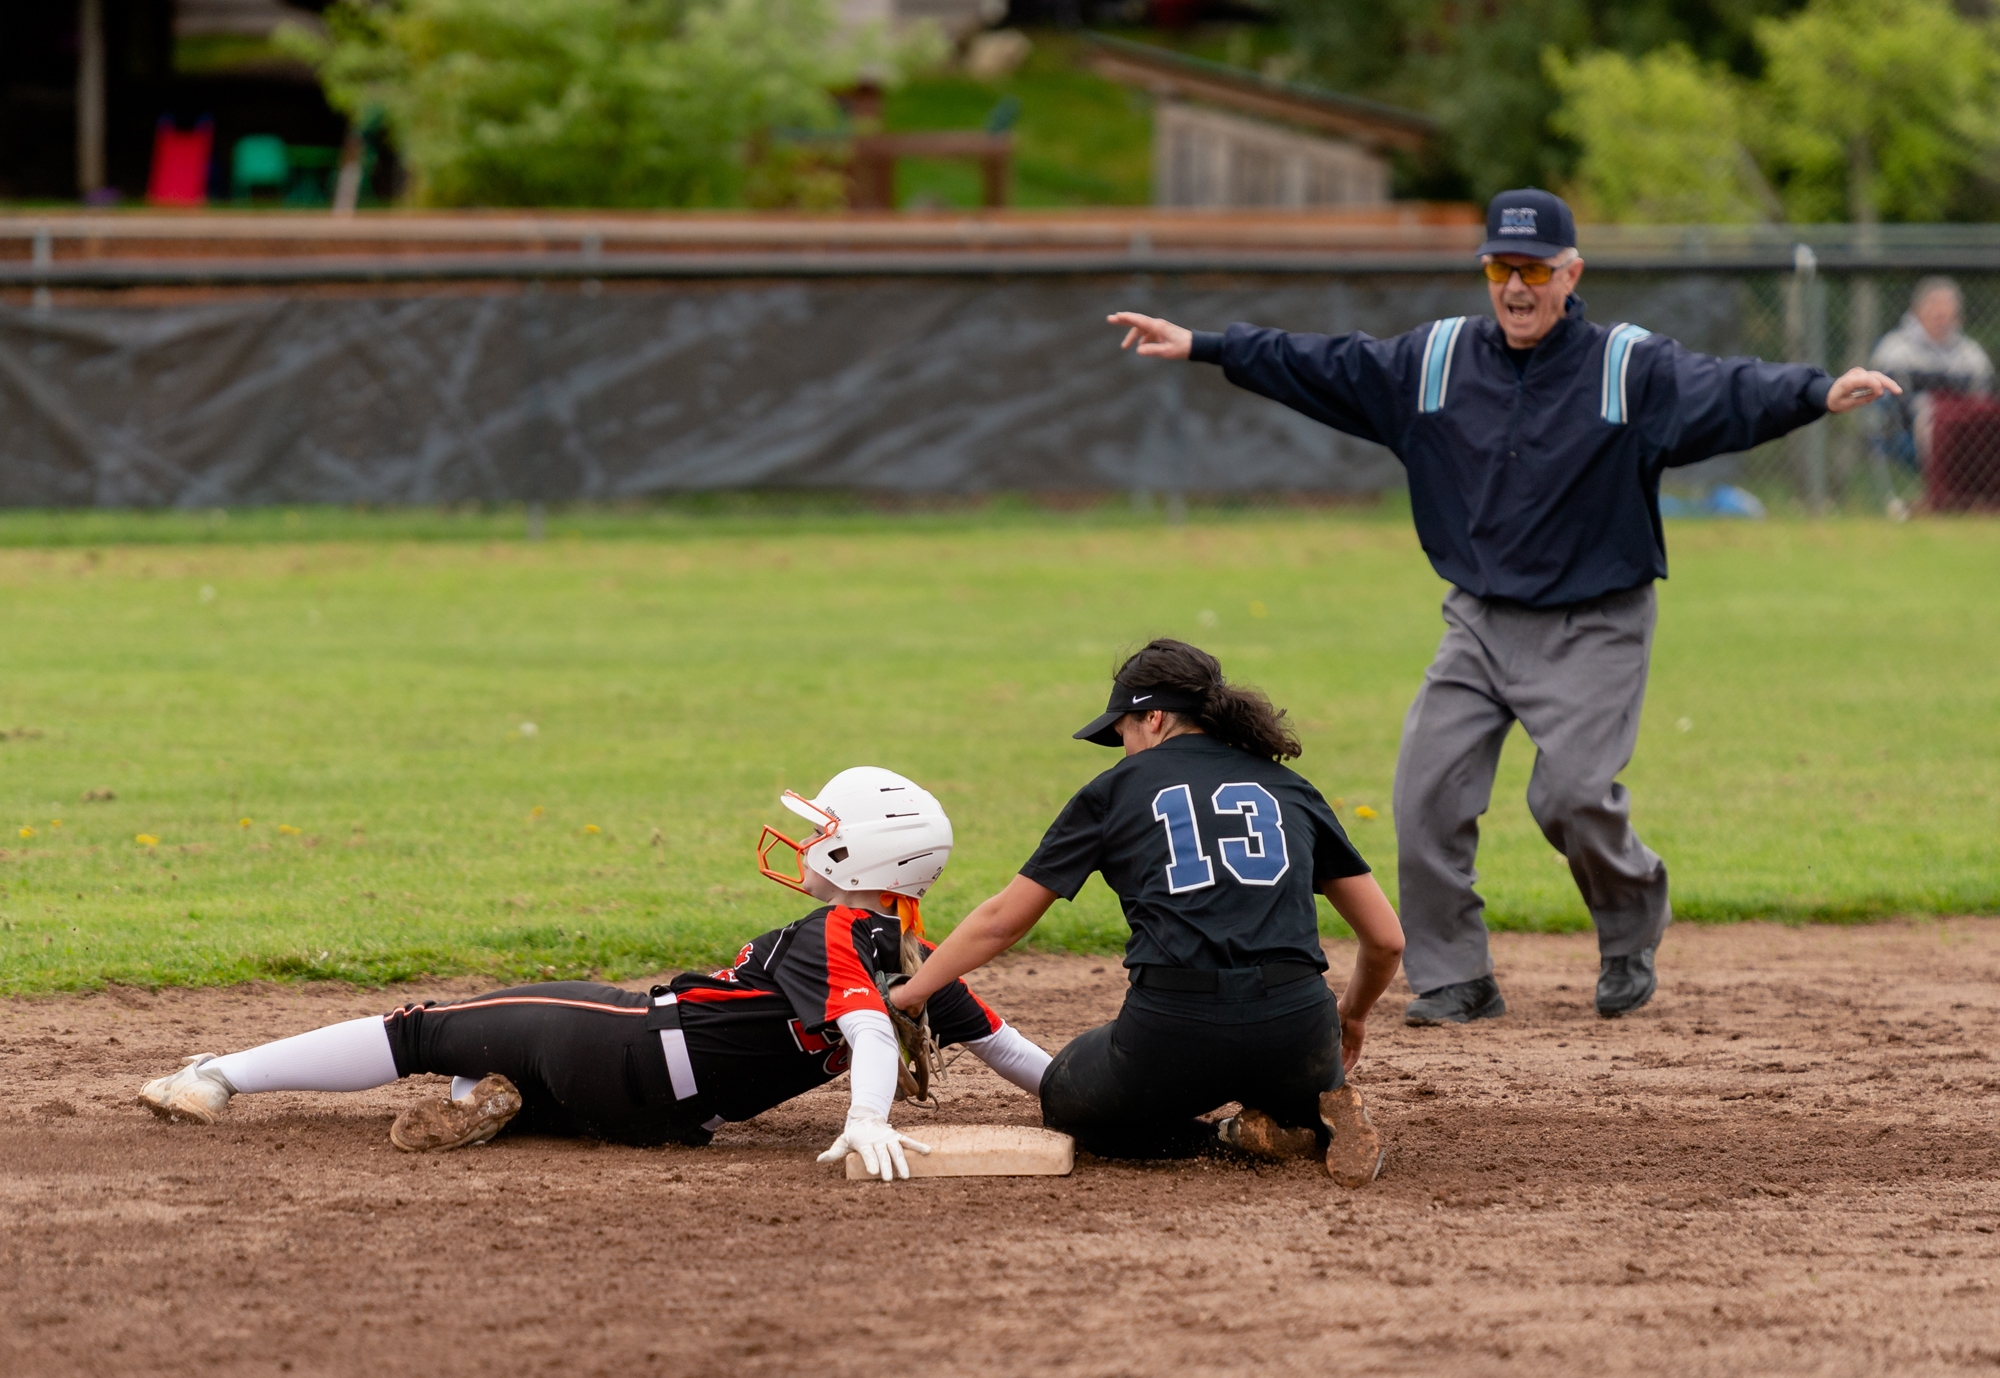 An umpire calls Battle Ground's Hailey Ferguson safe on a stolen base, as she beat the tag of Skyview's Kya Jenkins in a 4A Greater St. Helens League softball game on Friday, April 29, 2022, at Battle Ground High School. Skyview beat Battle Ground 2-0.